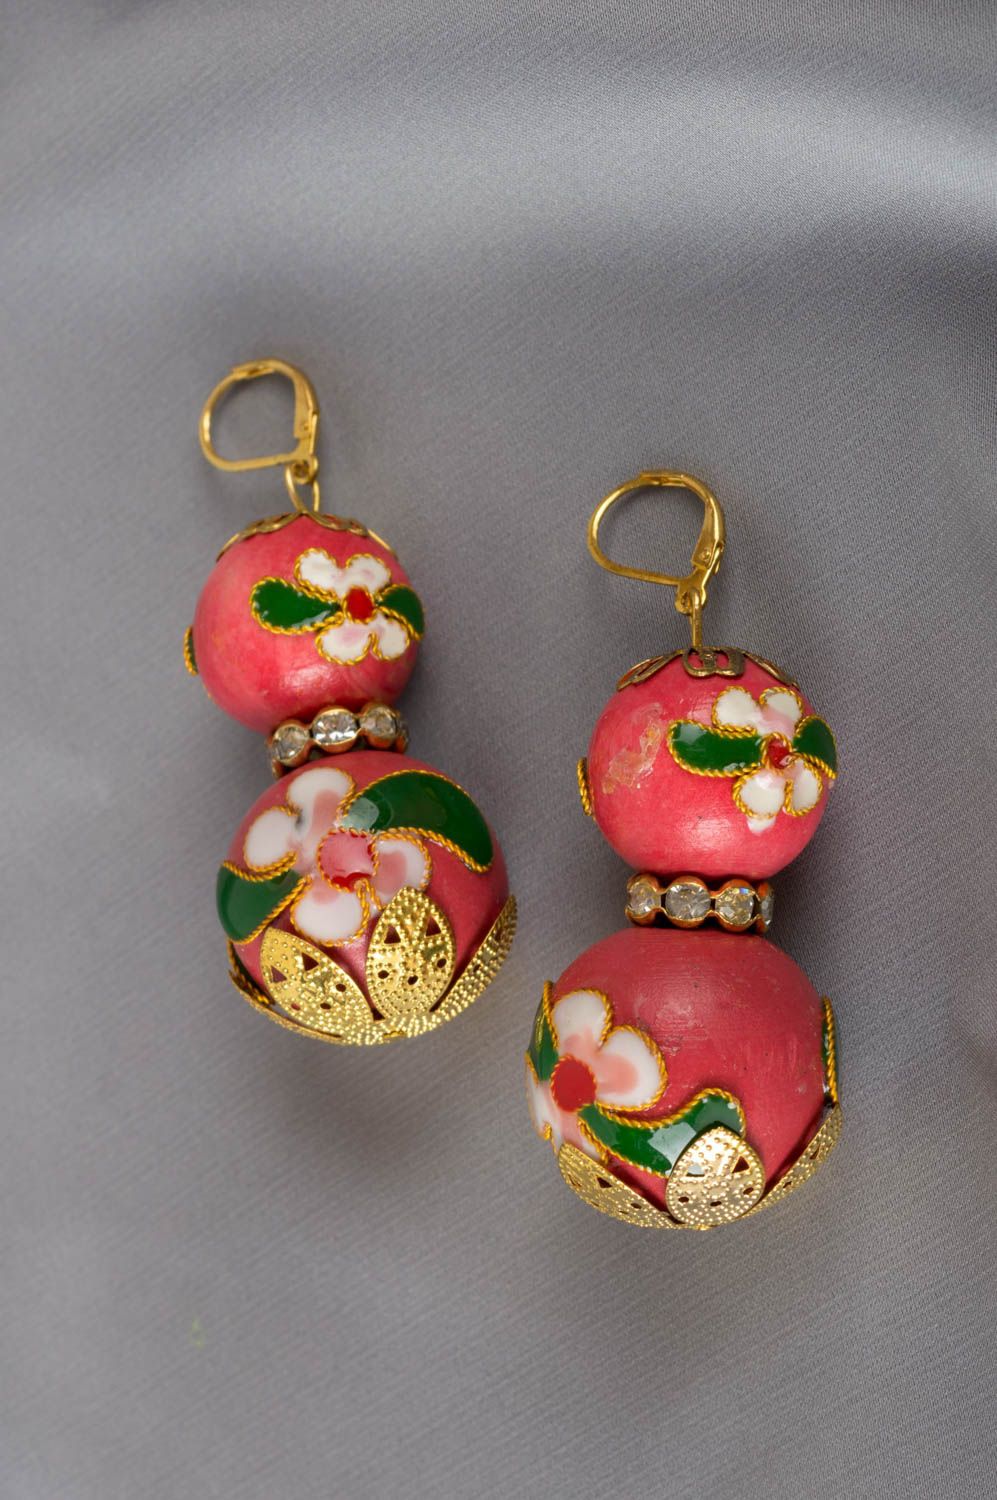 Handmade painted round earrings unusual wooden accessories earrings with charms photo 1